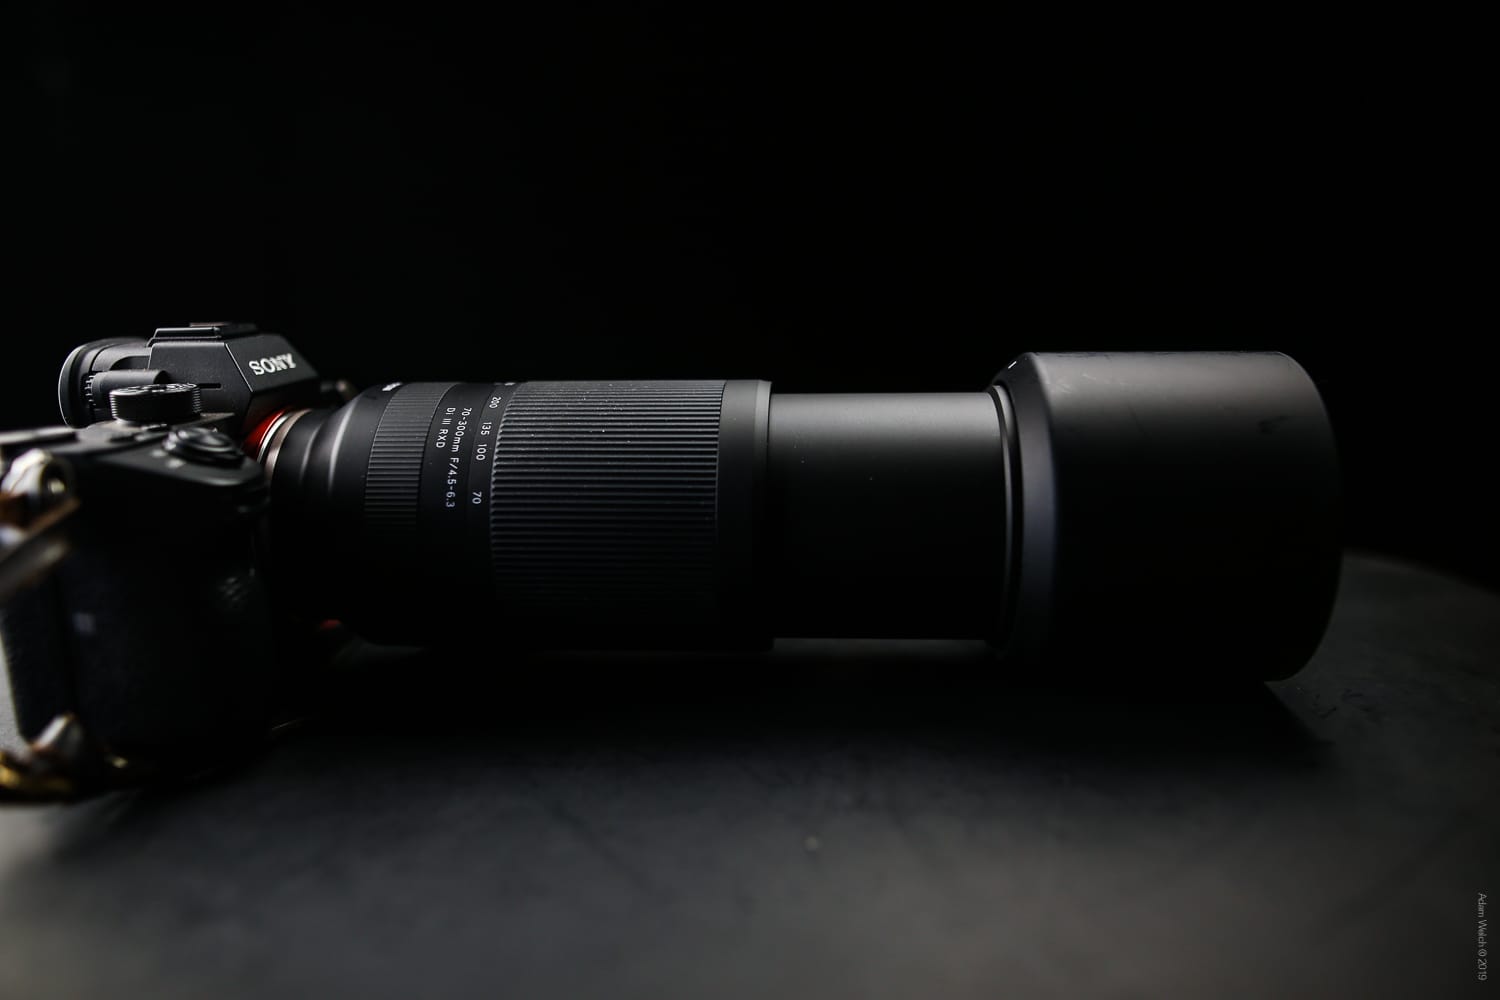 In-Depth Review of the New 70-300mm f/4.5-6.3 DI III RXD Lens from Tamron